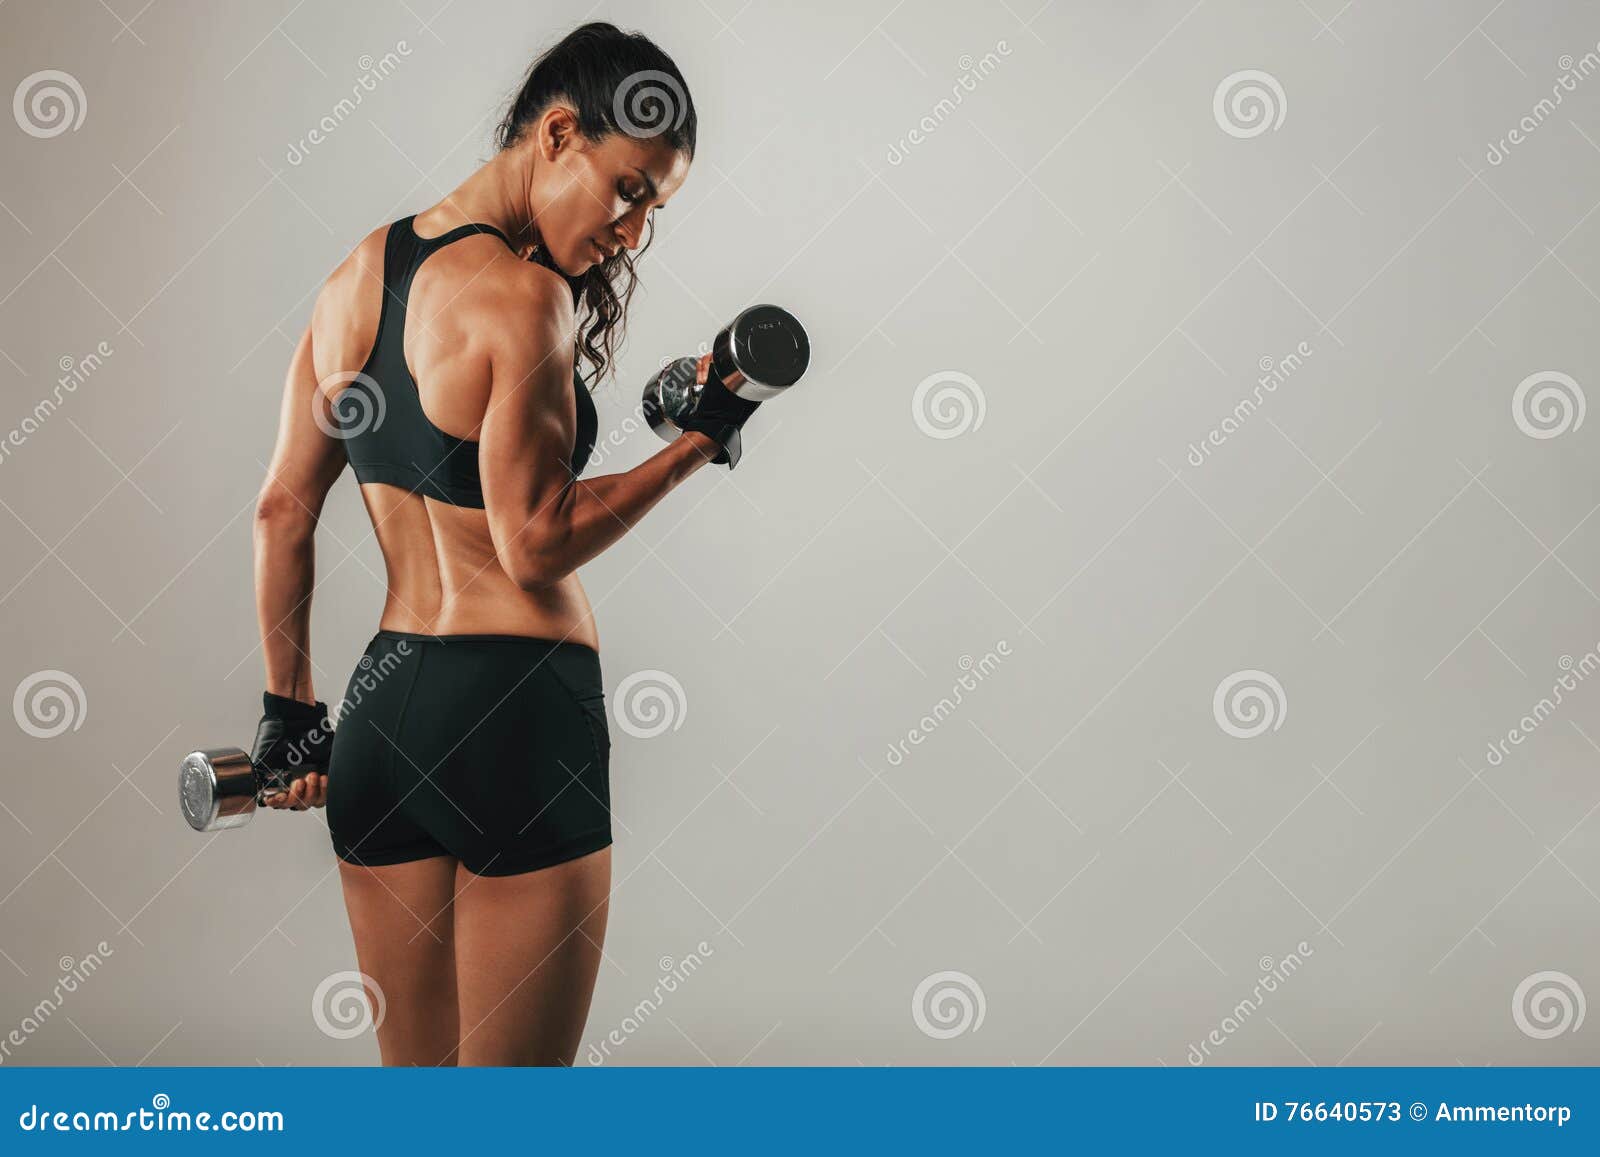 26,210 Strong Arm Woman Stock Photos - Free & Royalty-Free